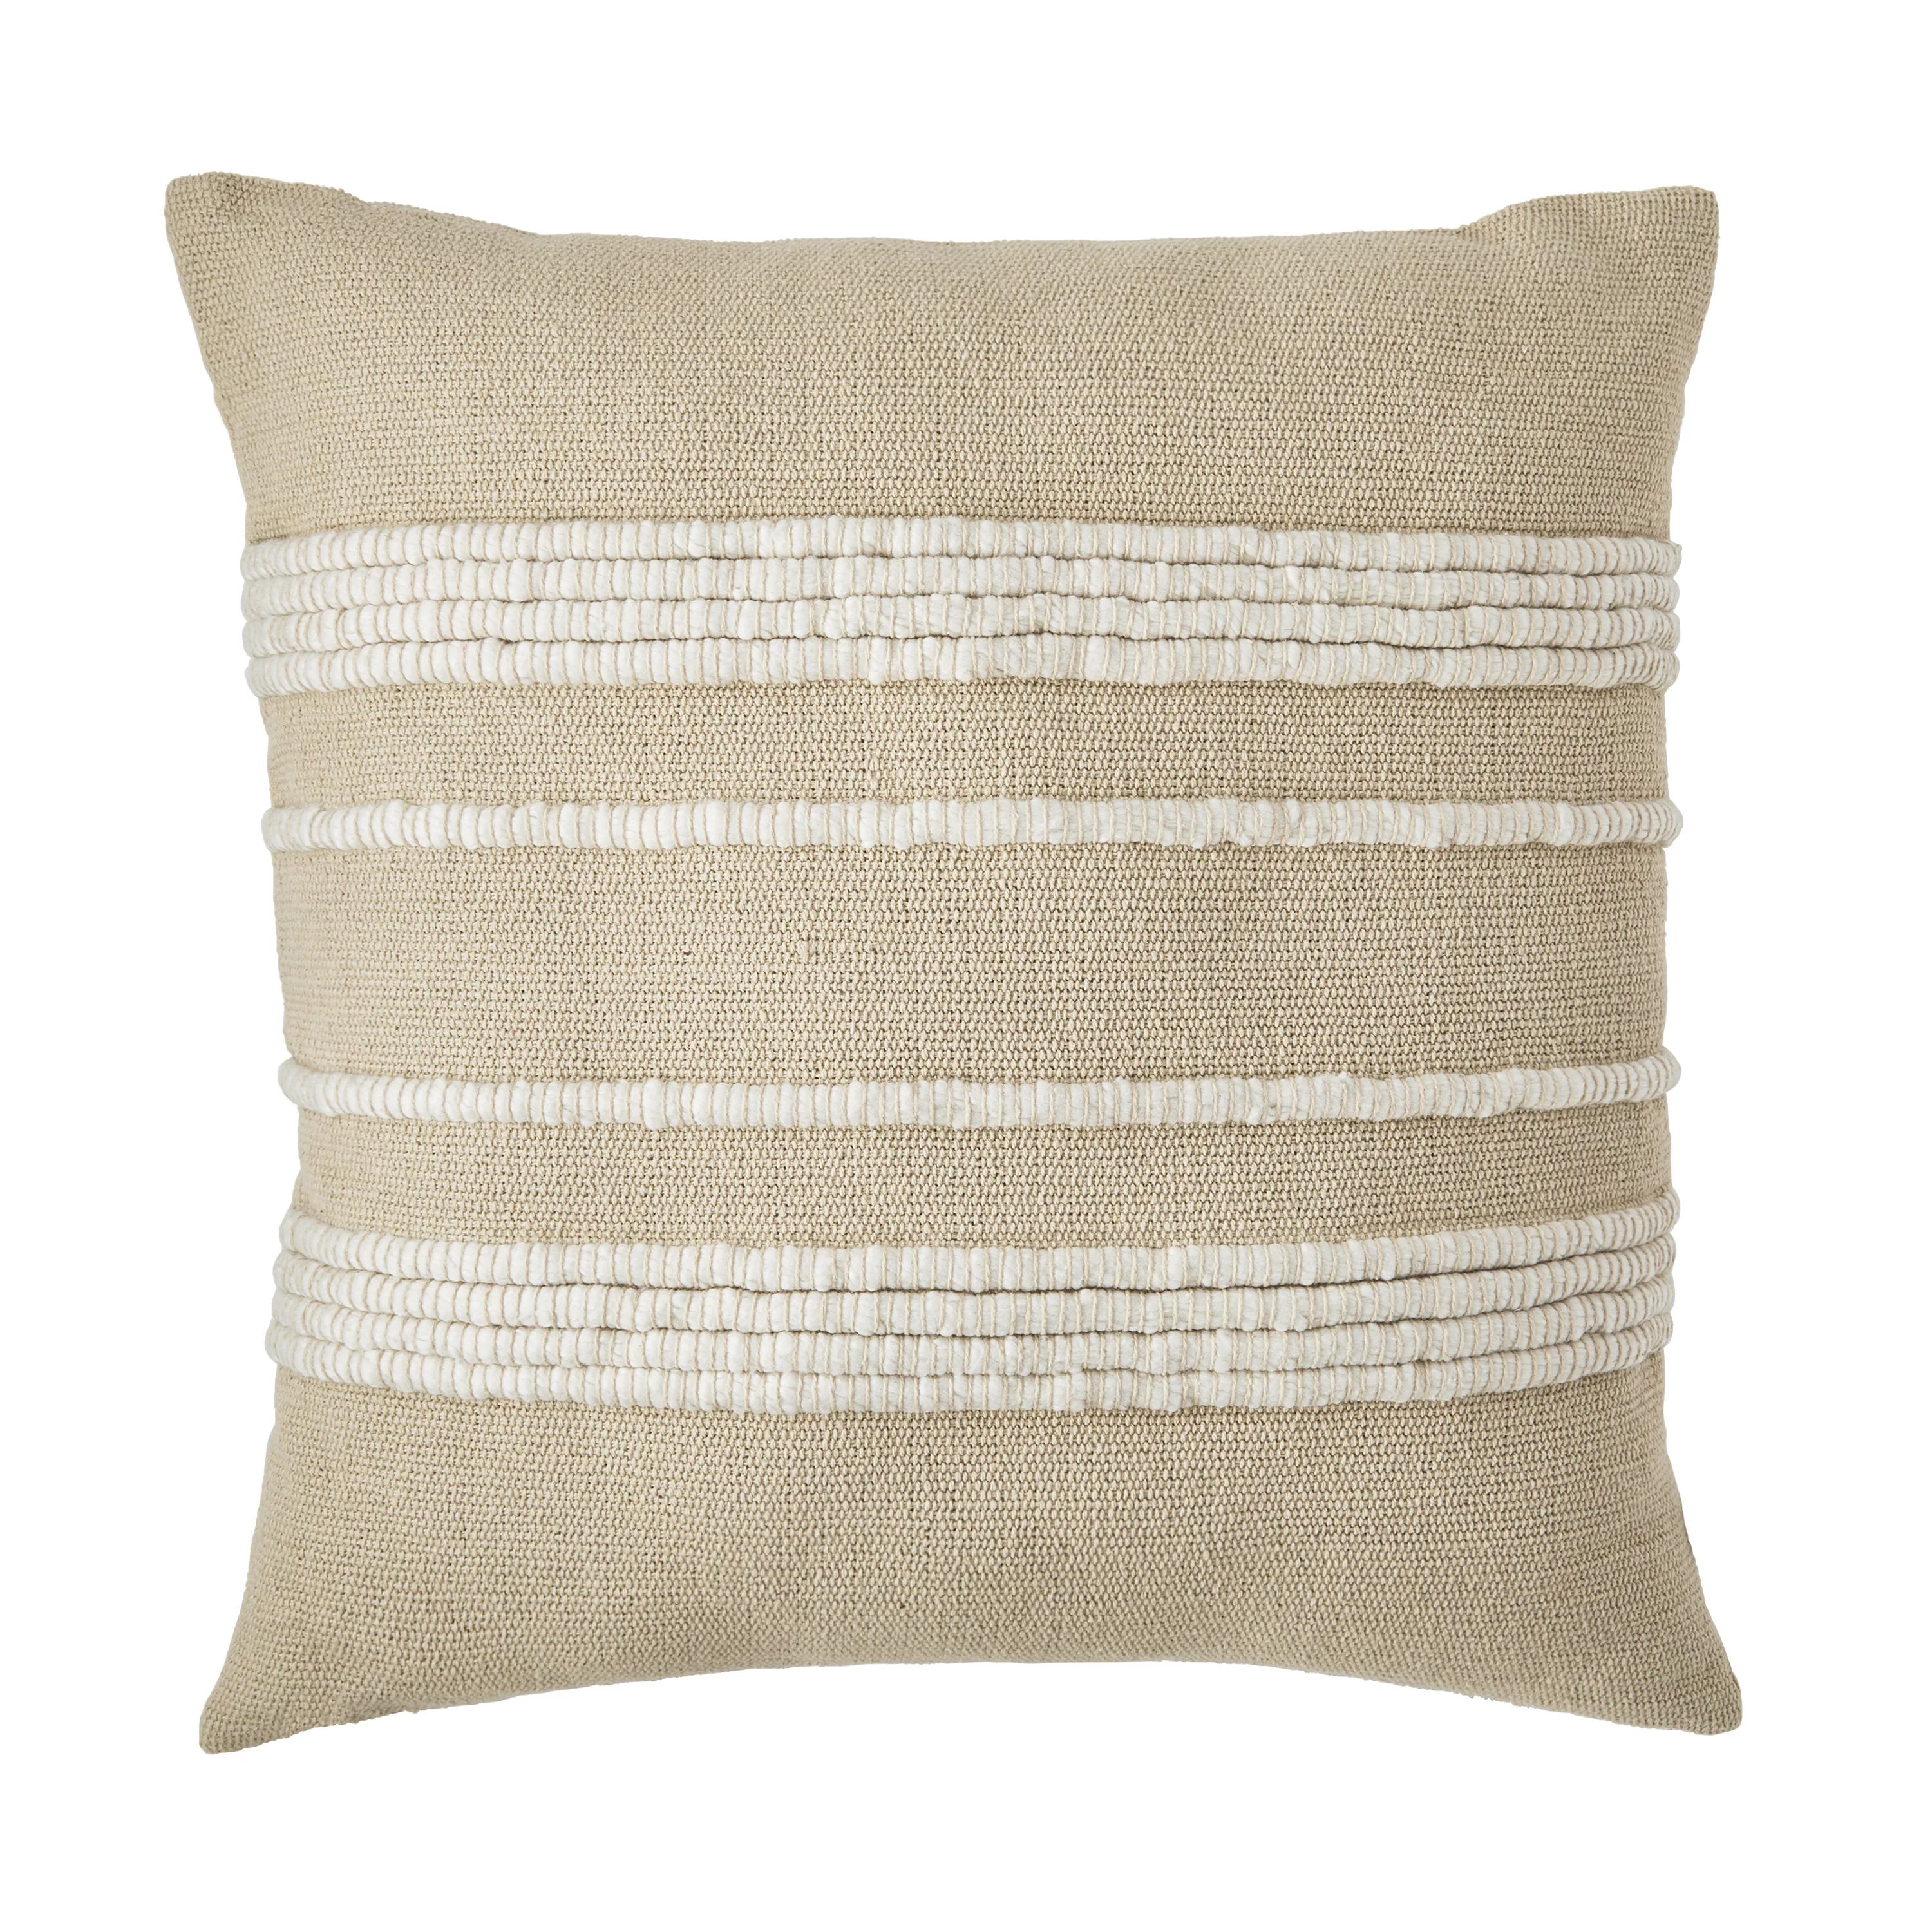 Better Homes & Gardens Tan Corded 20" x 20" Pillow by Dave & Jenny Marrs | Walmart (US)